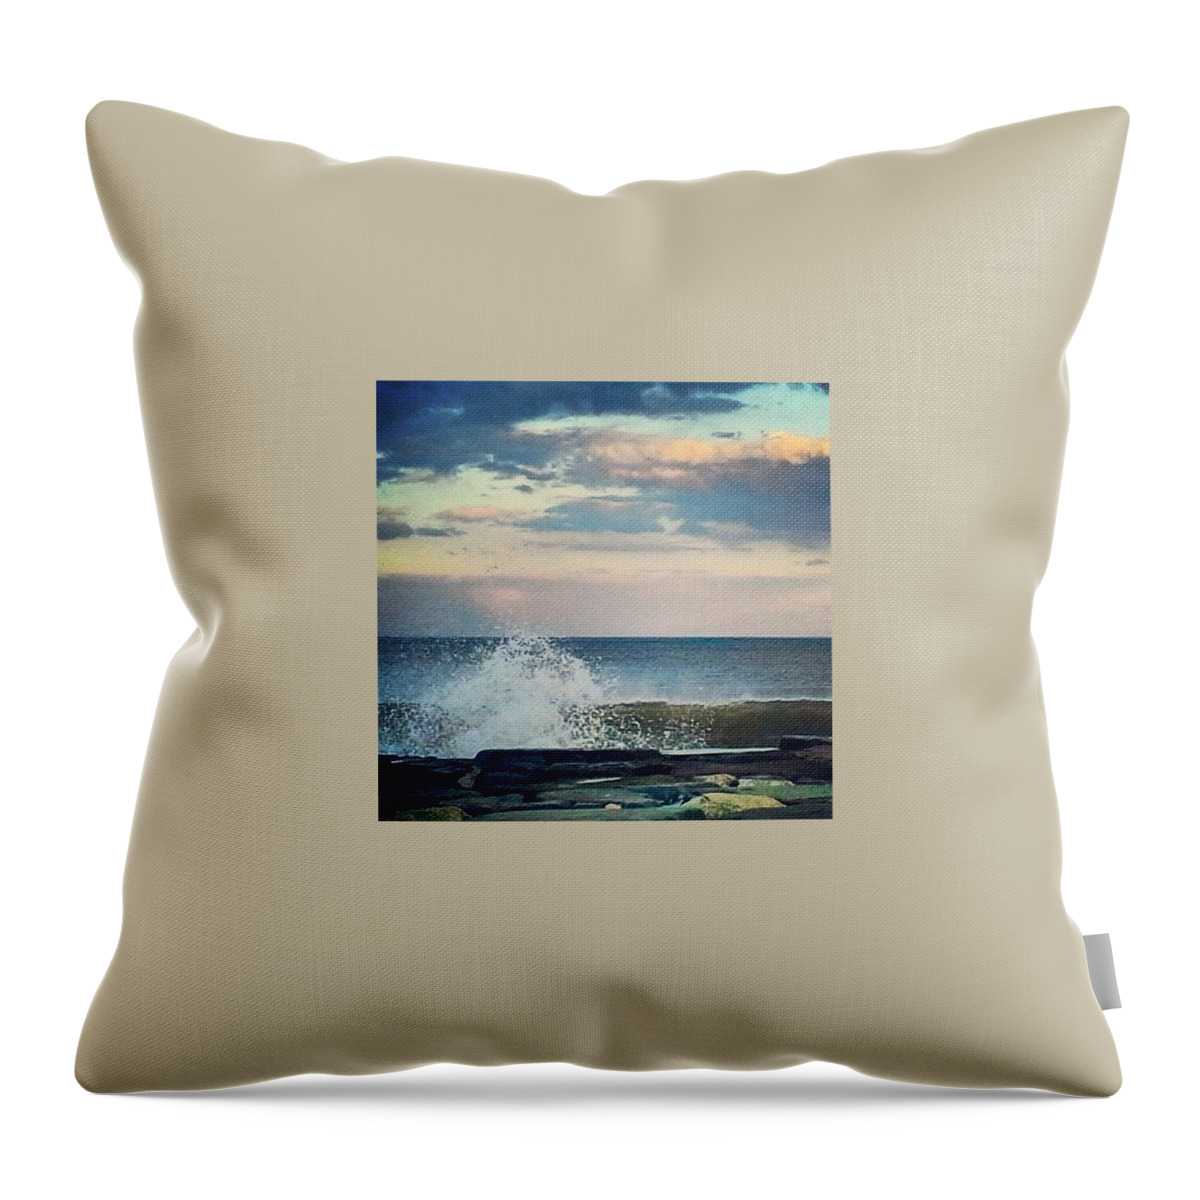 Asbury Park Throw Pillow featuring the photograph Wave Splashes As Sun Sets by Lauren Fitzpatrick